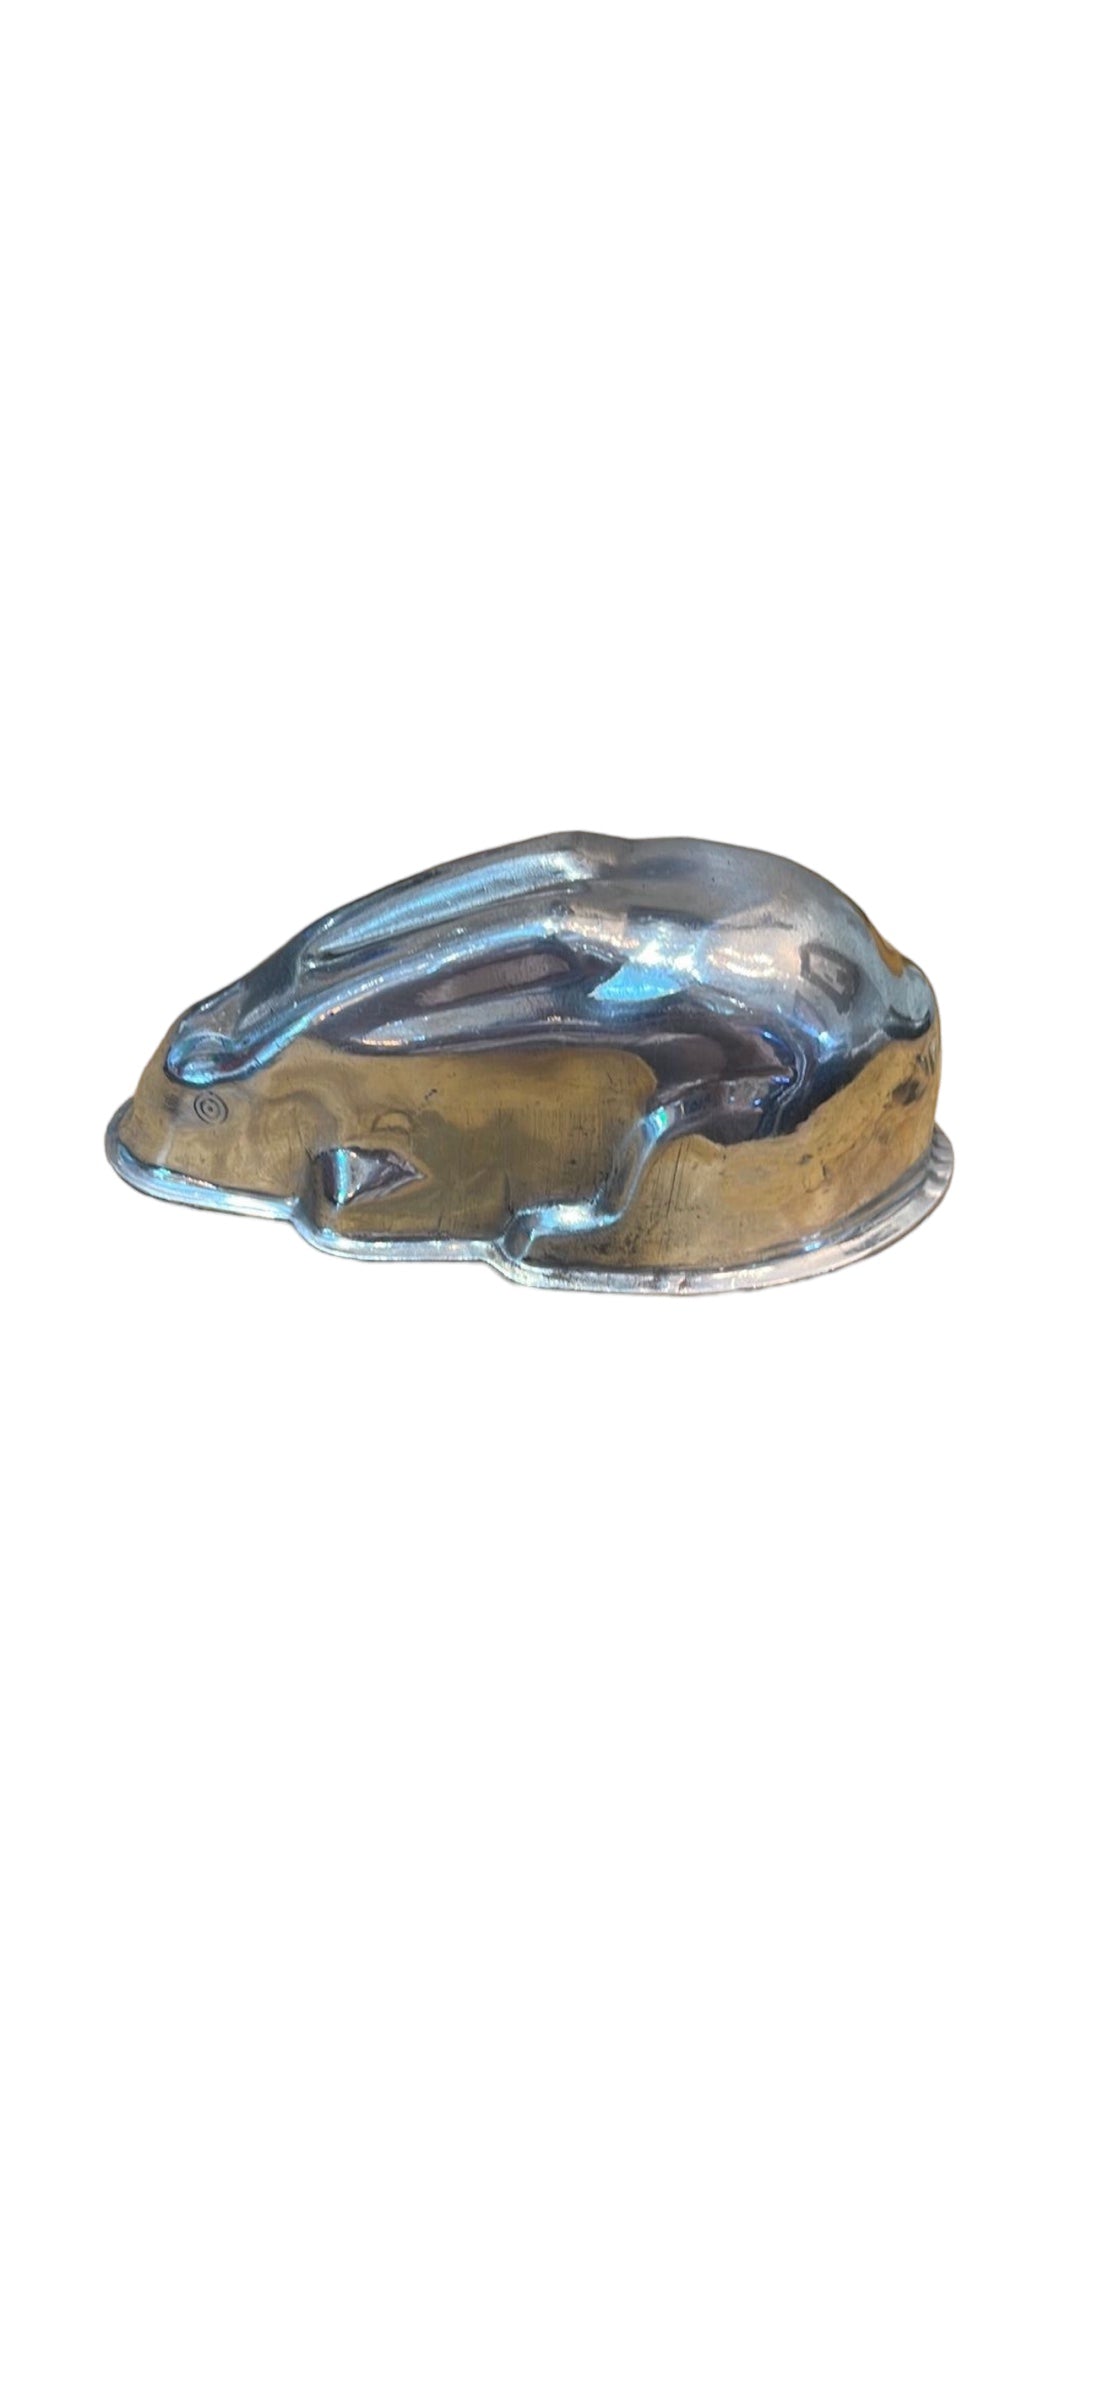 NUTBROWN Rabbit Jelly Mold